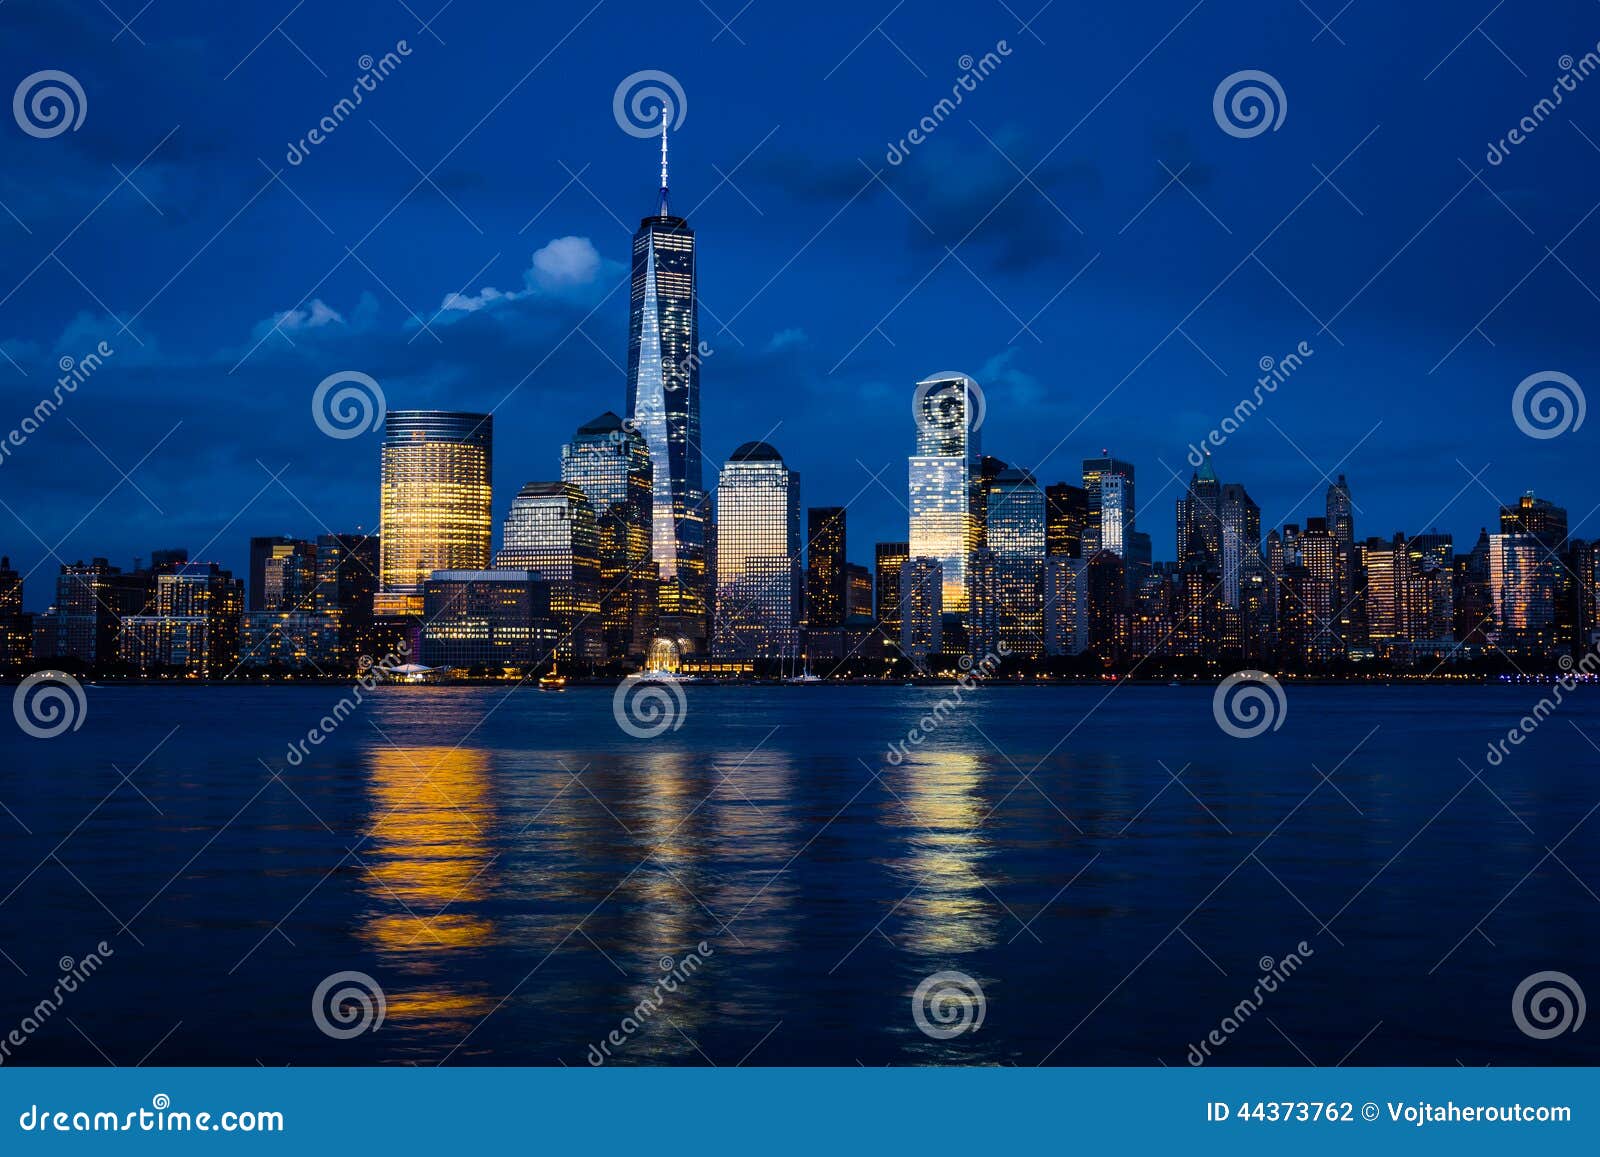 new york city manhattan downtown skyline with skyscrapers illuminated over hudson river panorama